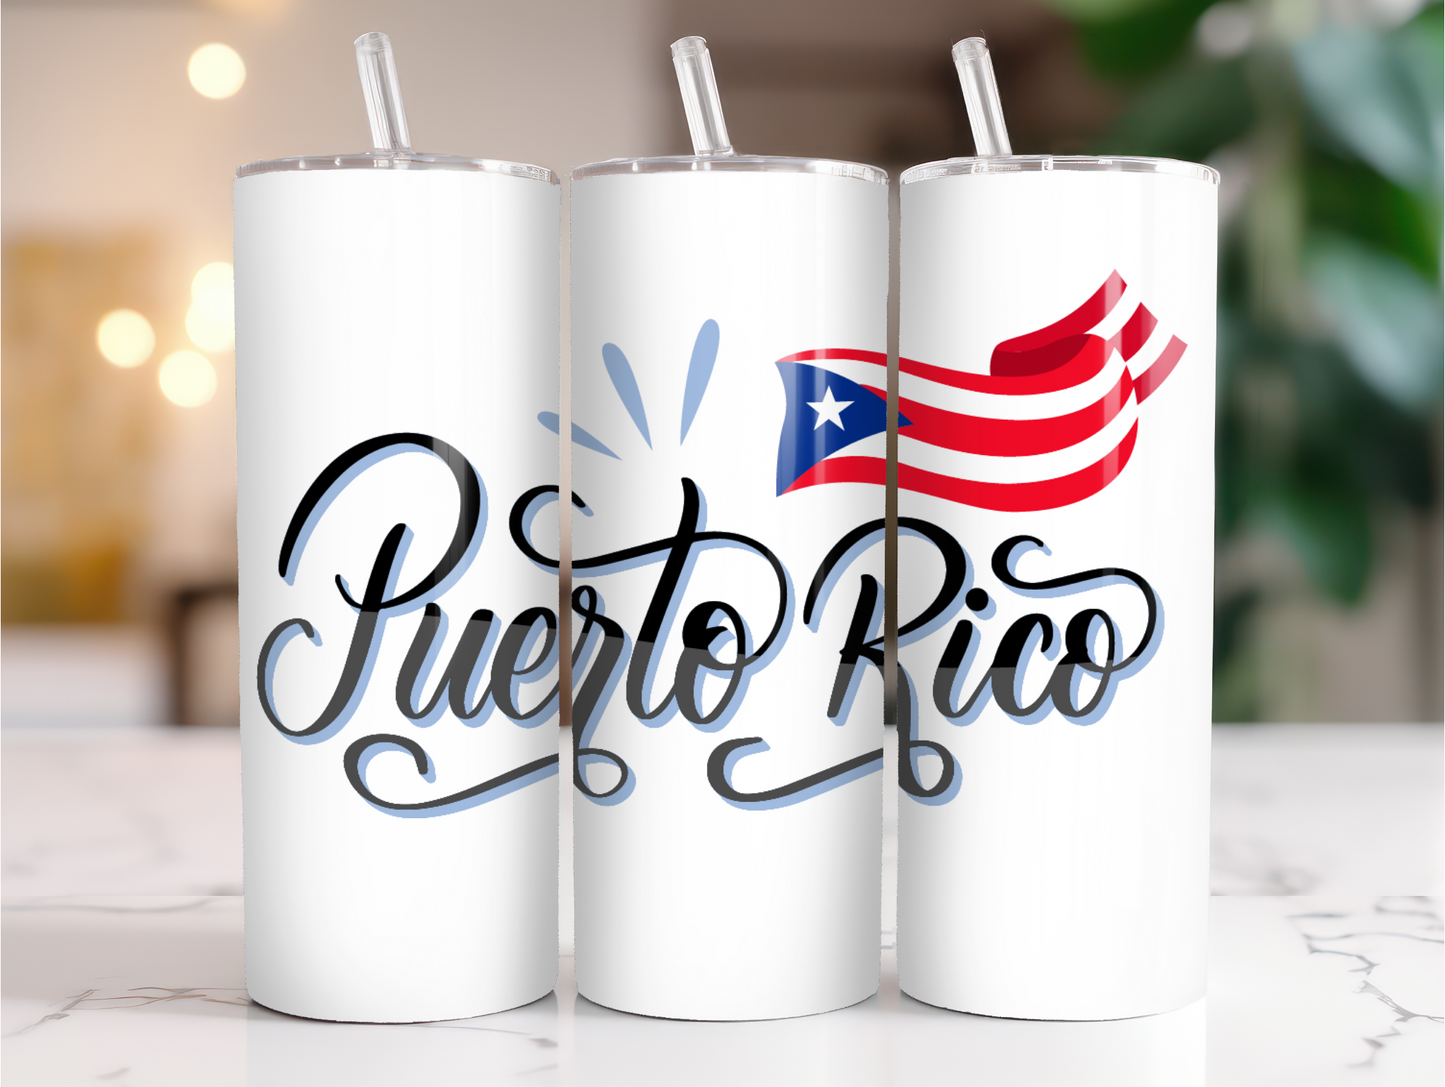 Puerto Rico with flag